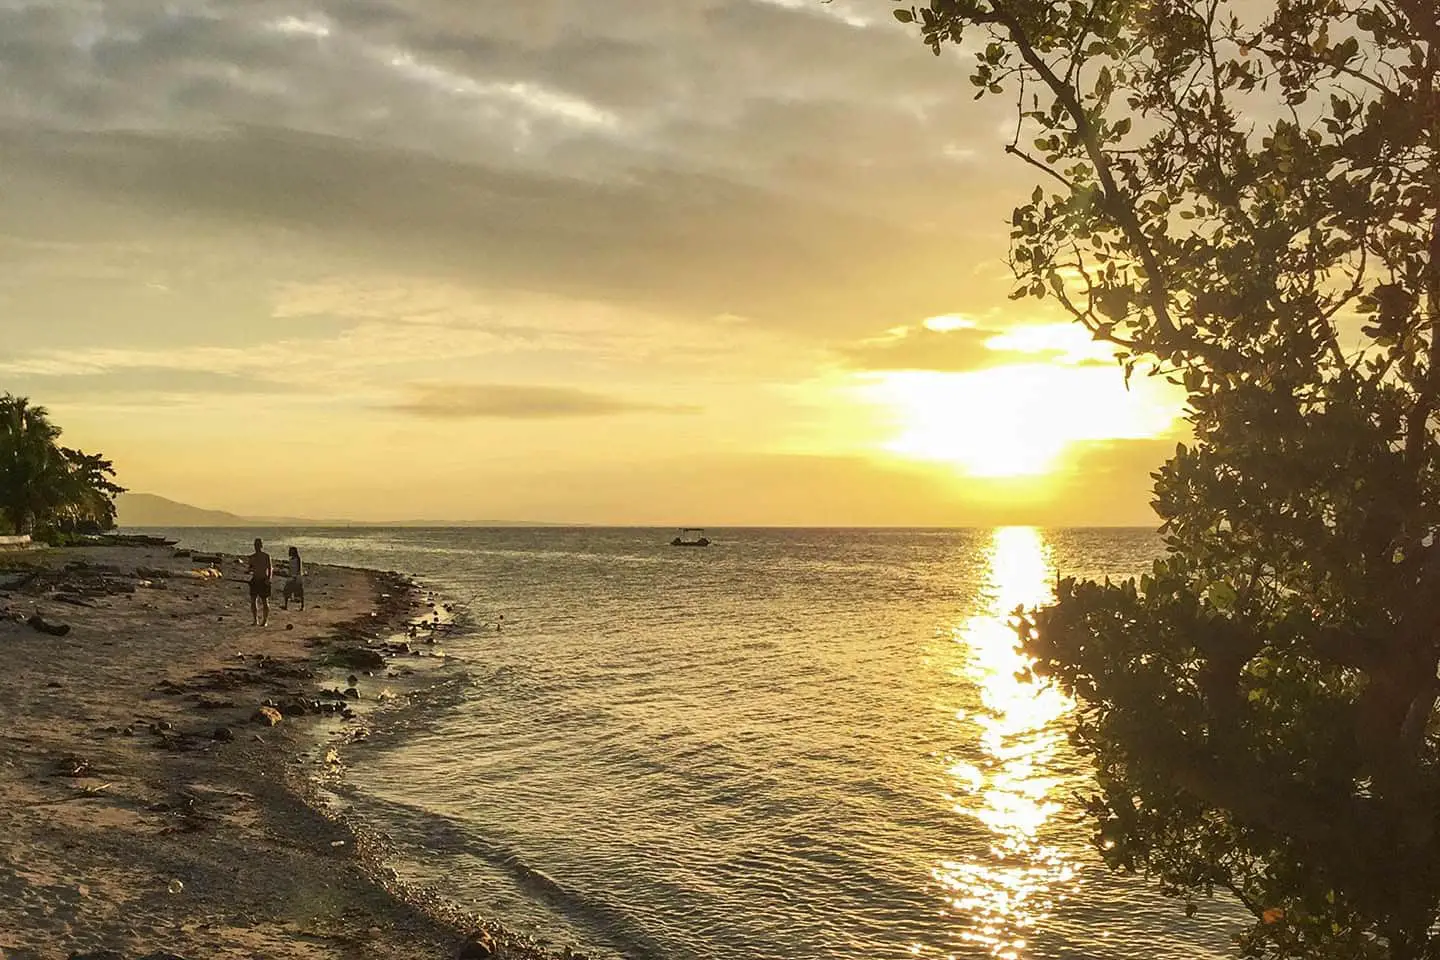 Dumaguete Siquijor Itinerary: 7 Days in the Philippines